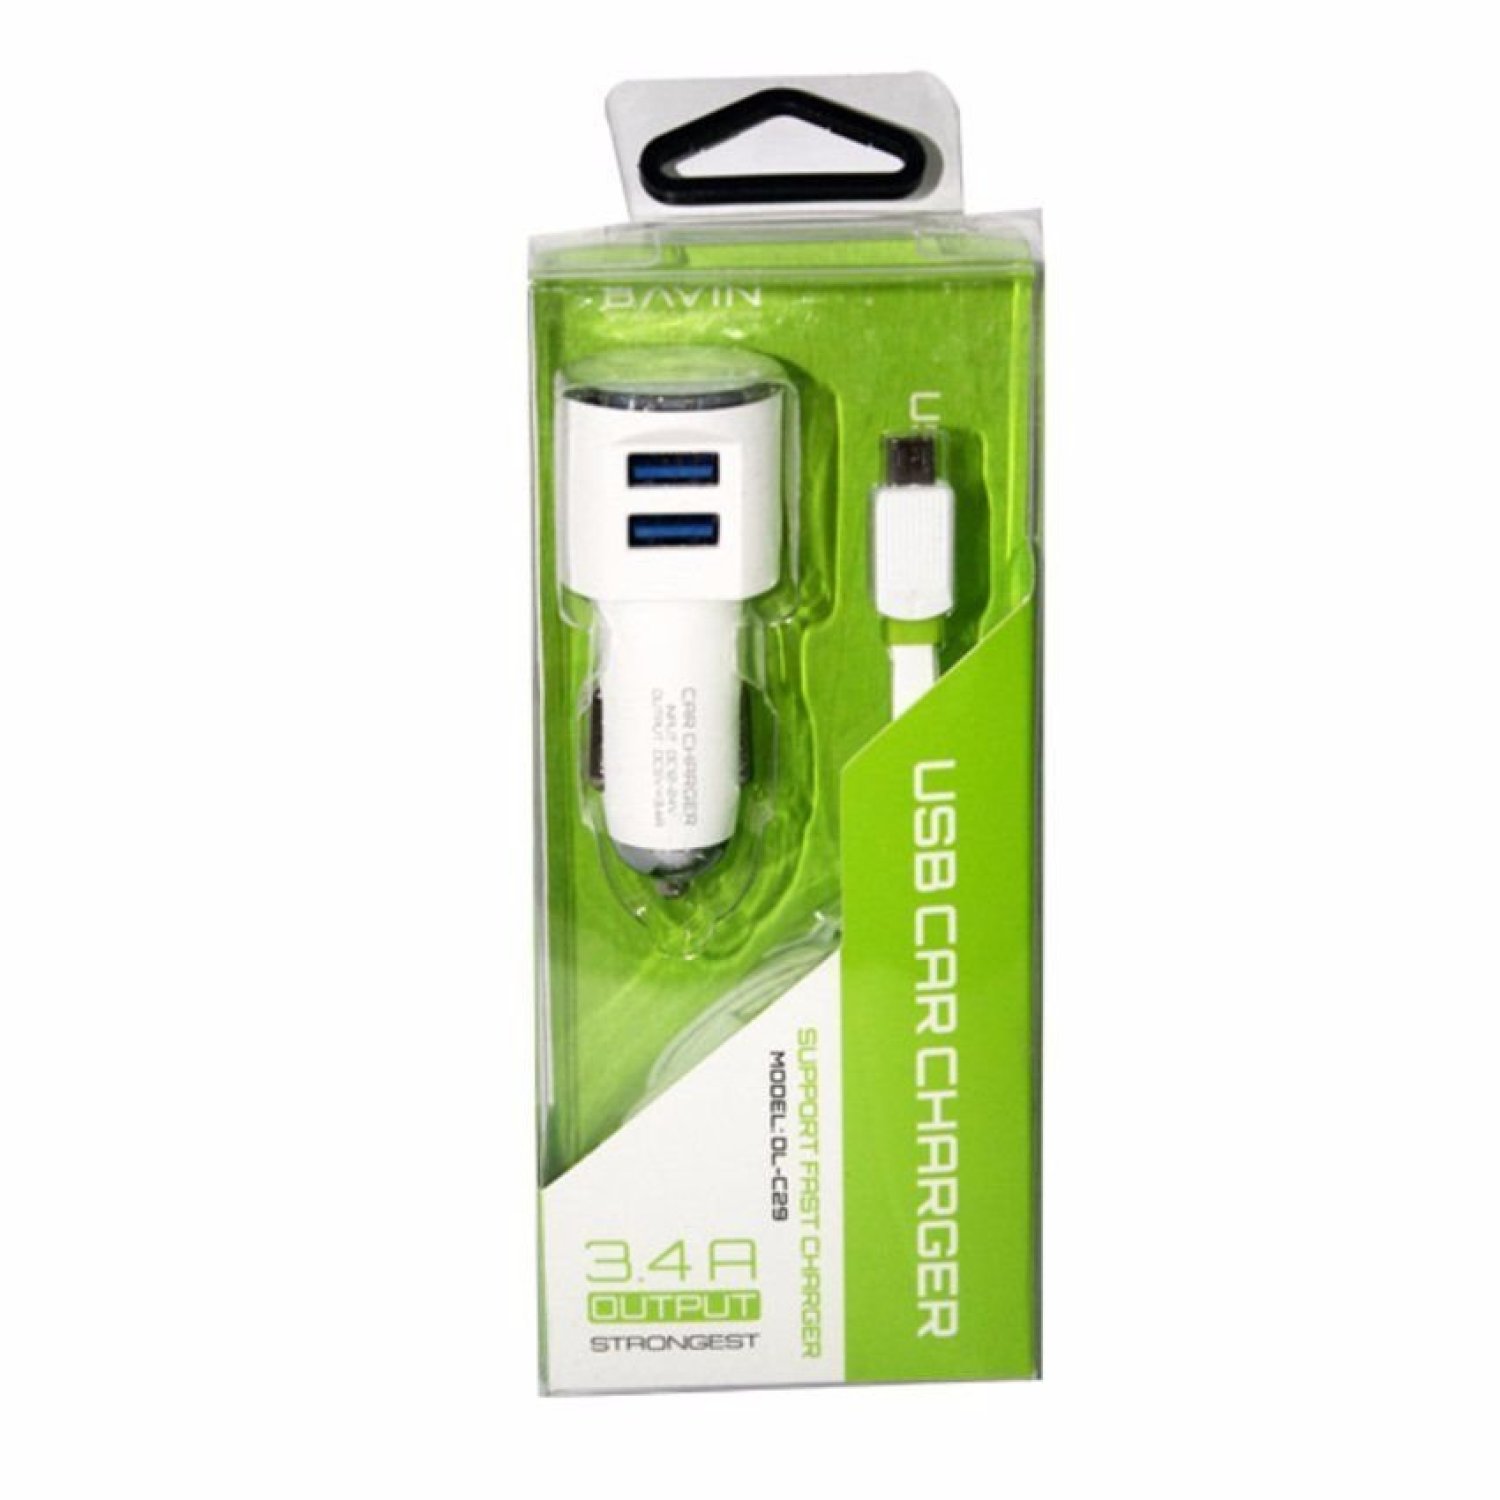 fast car charger for android